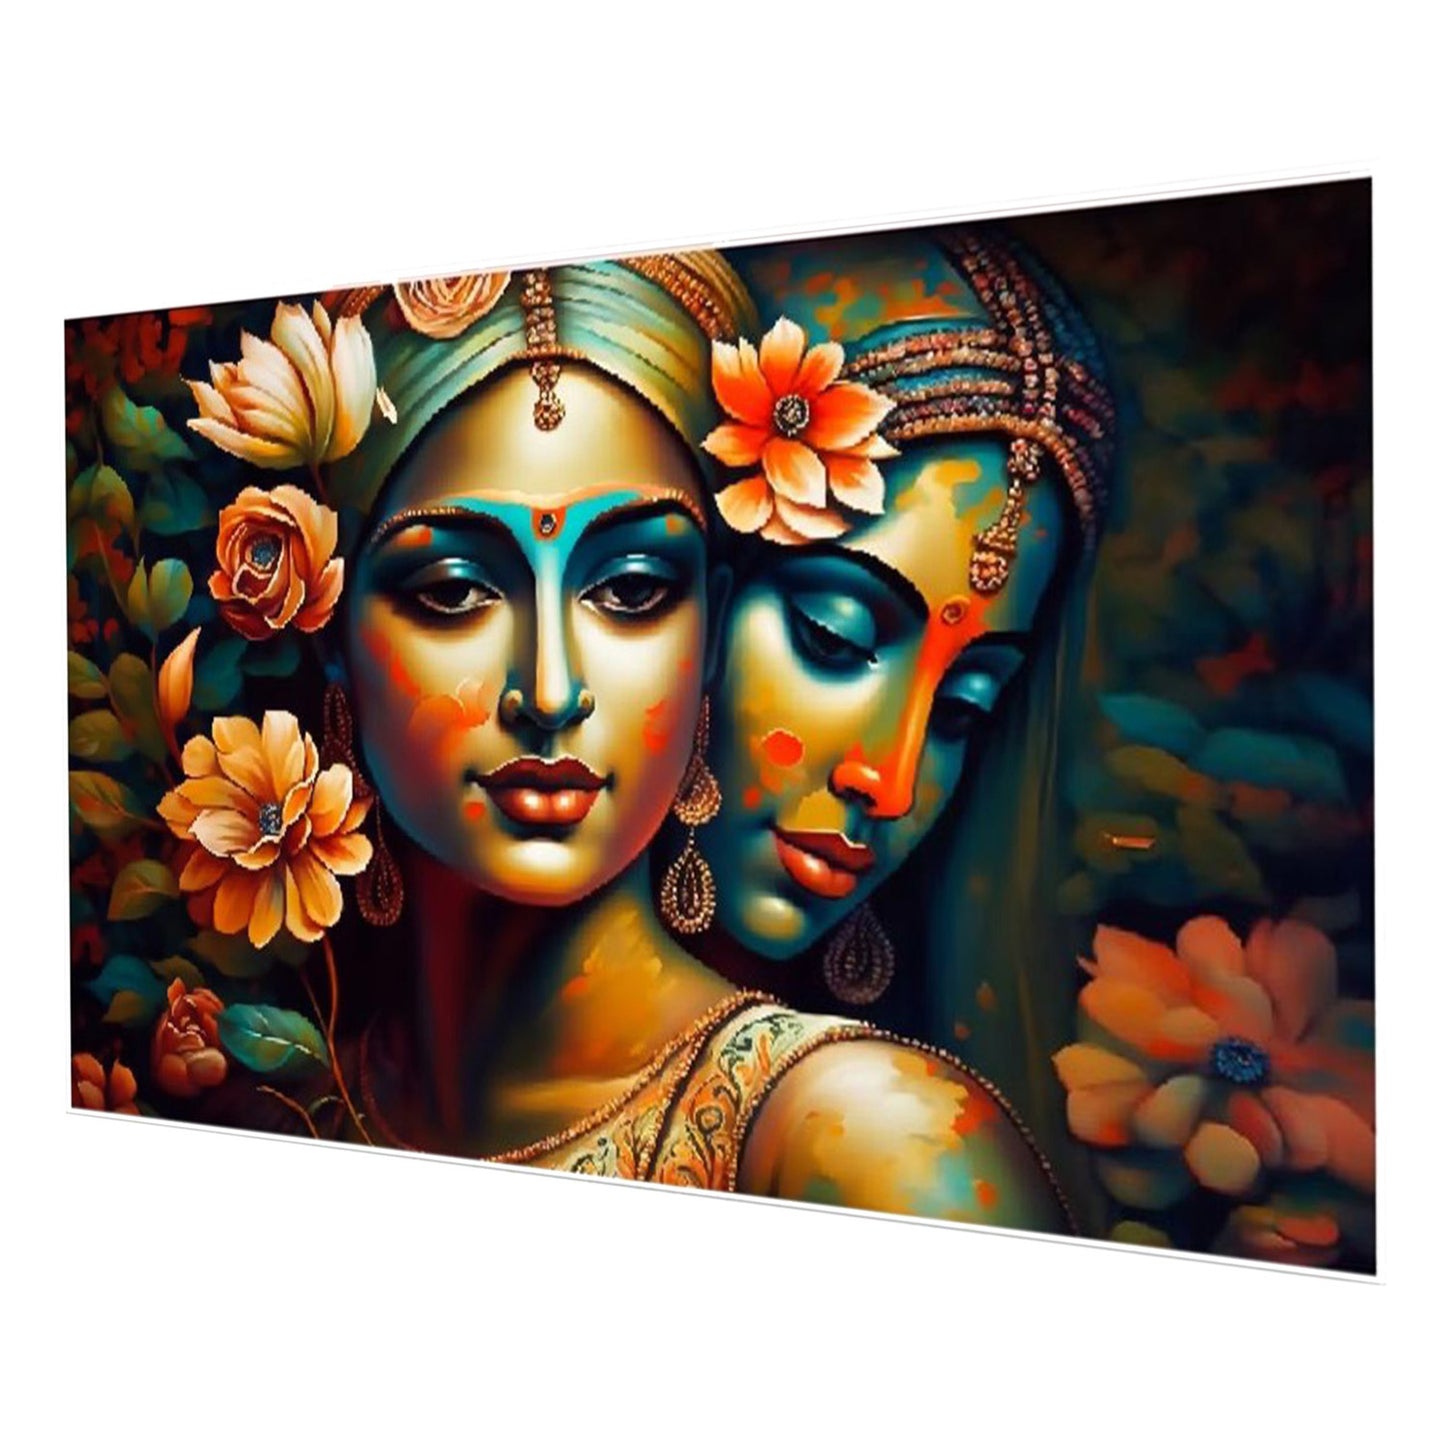 Graceful Women Amid Vibrant Blooms Wall Painting